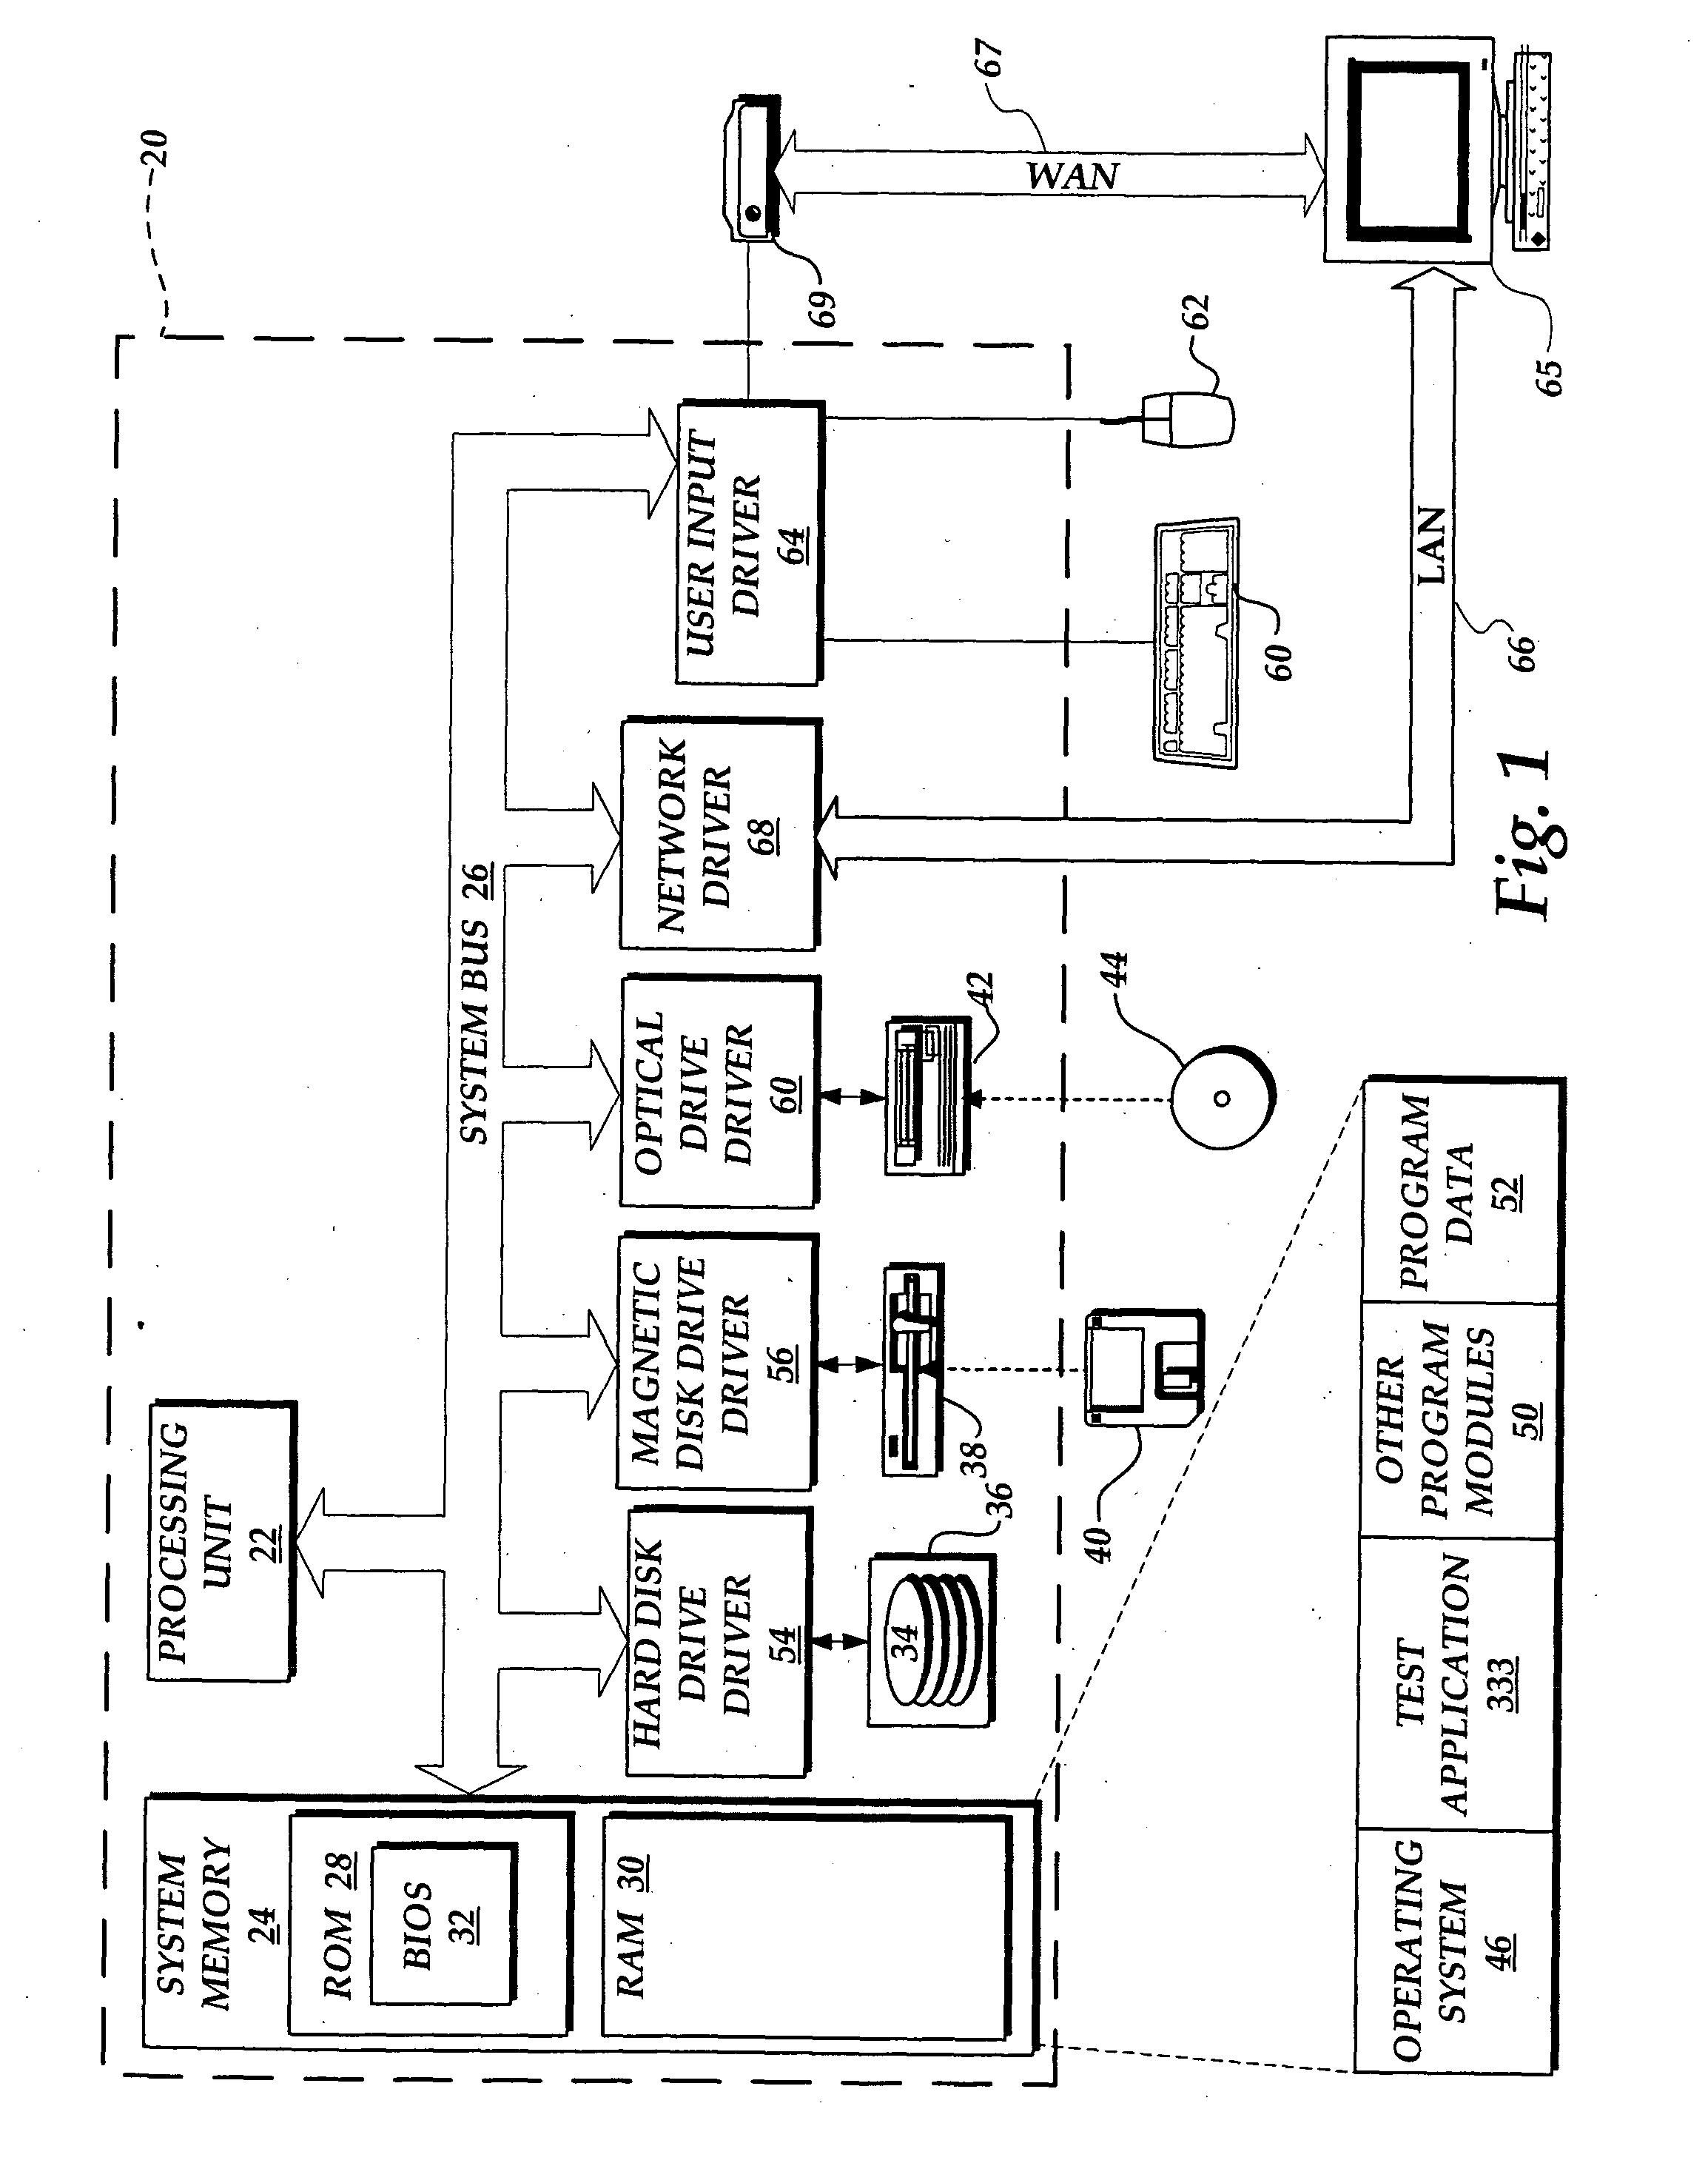 System and method for testing, simulating, and controlling computer software and hardware